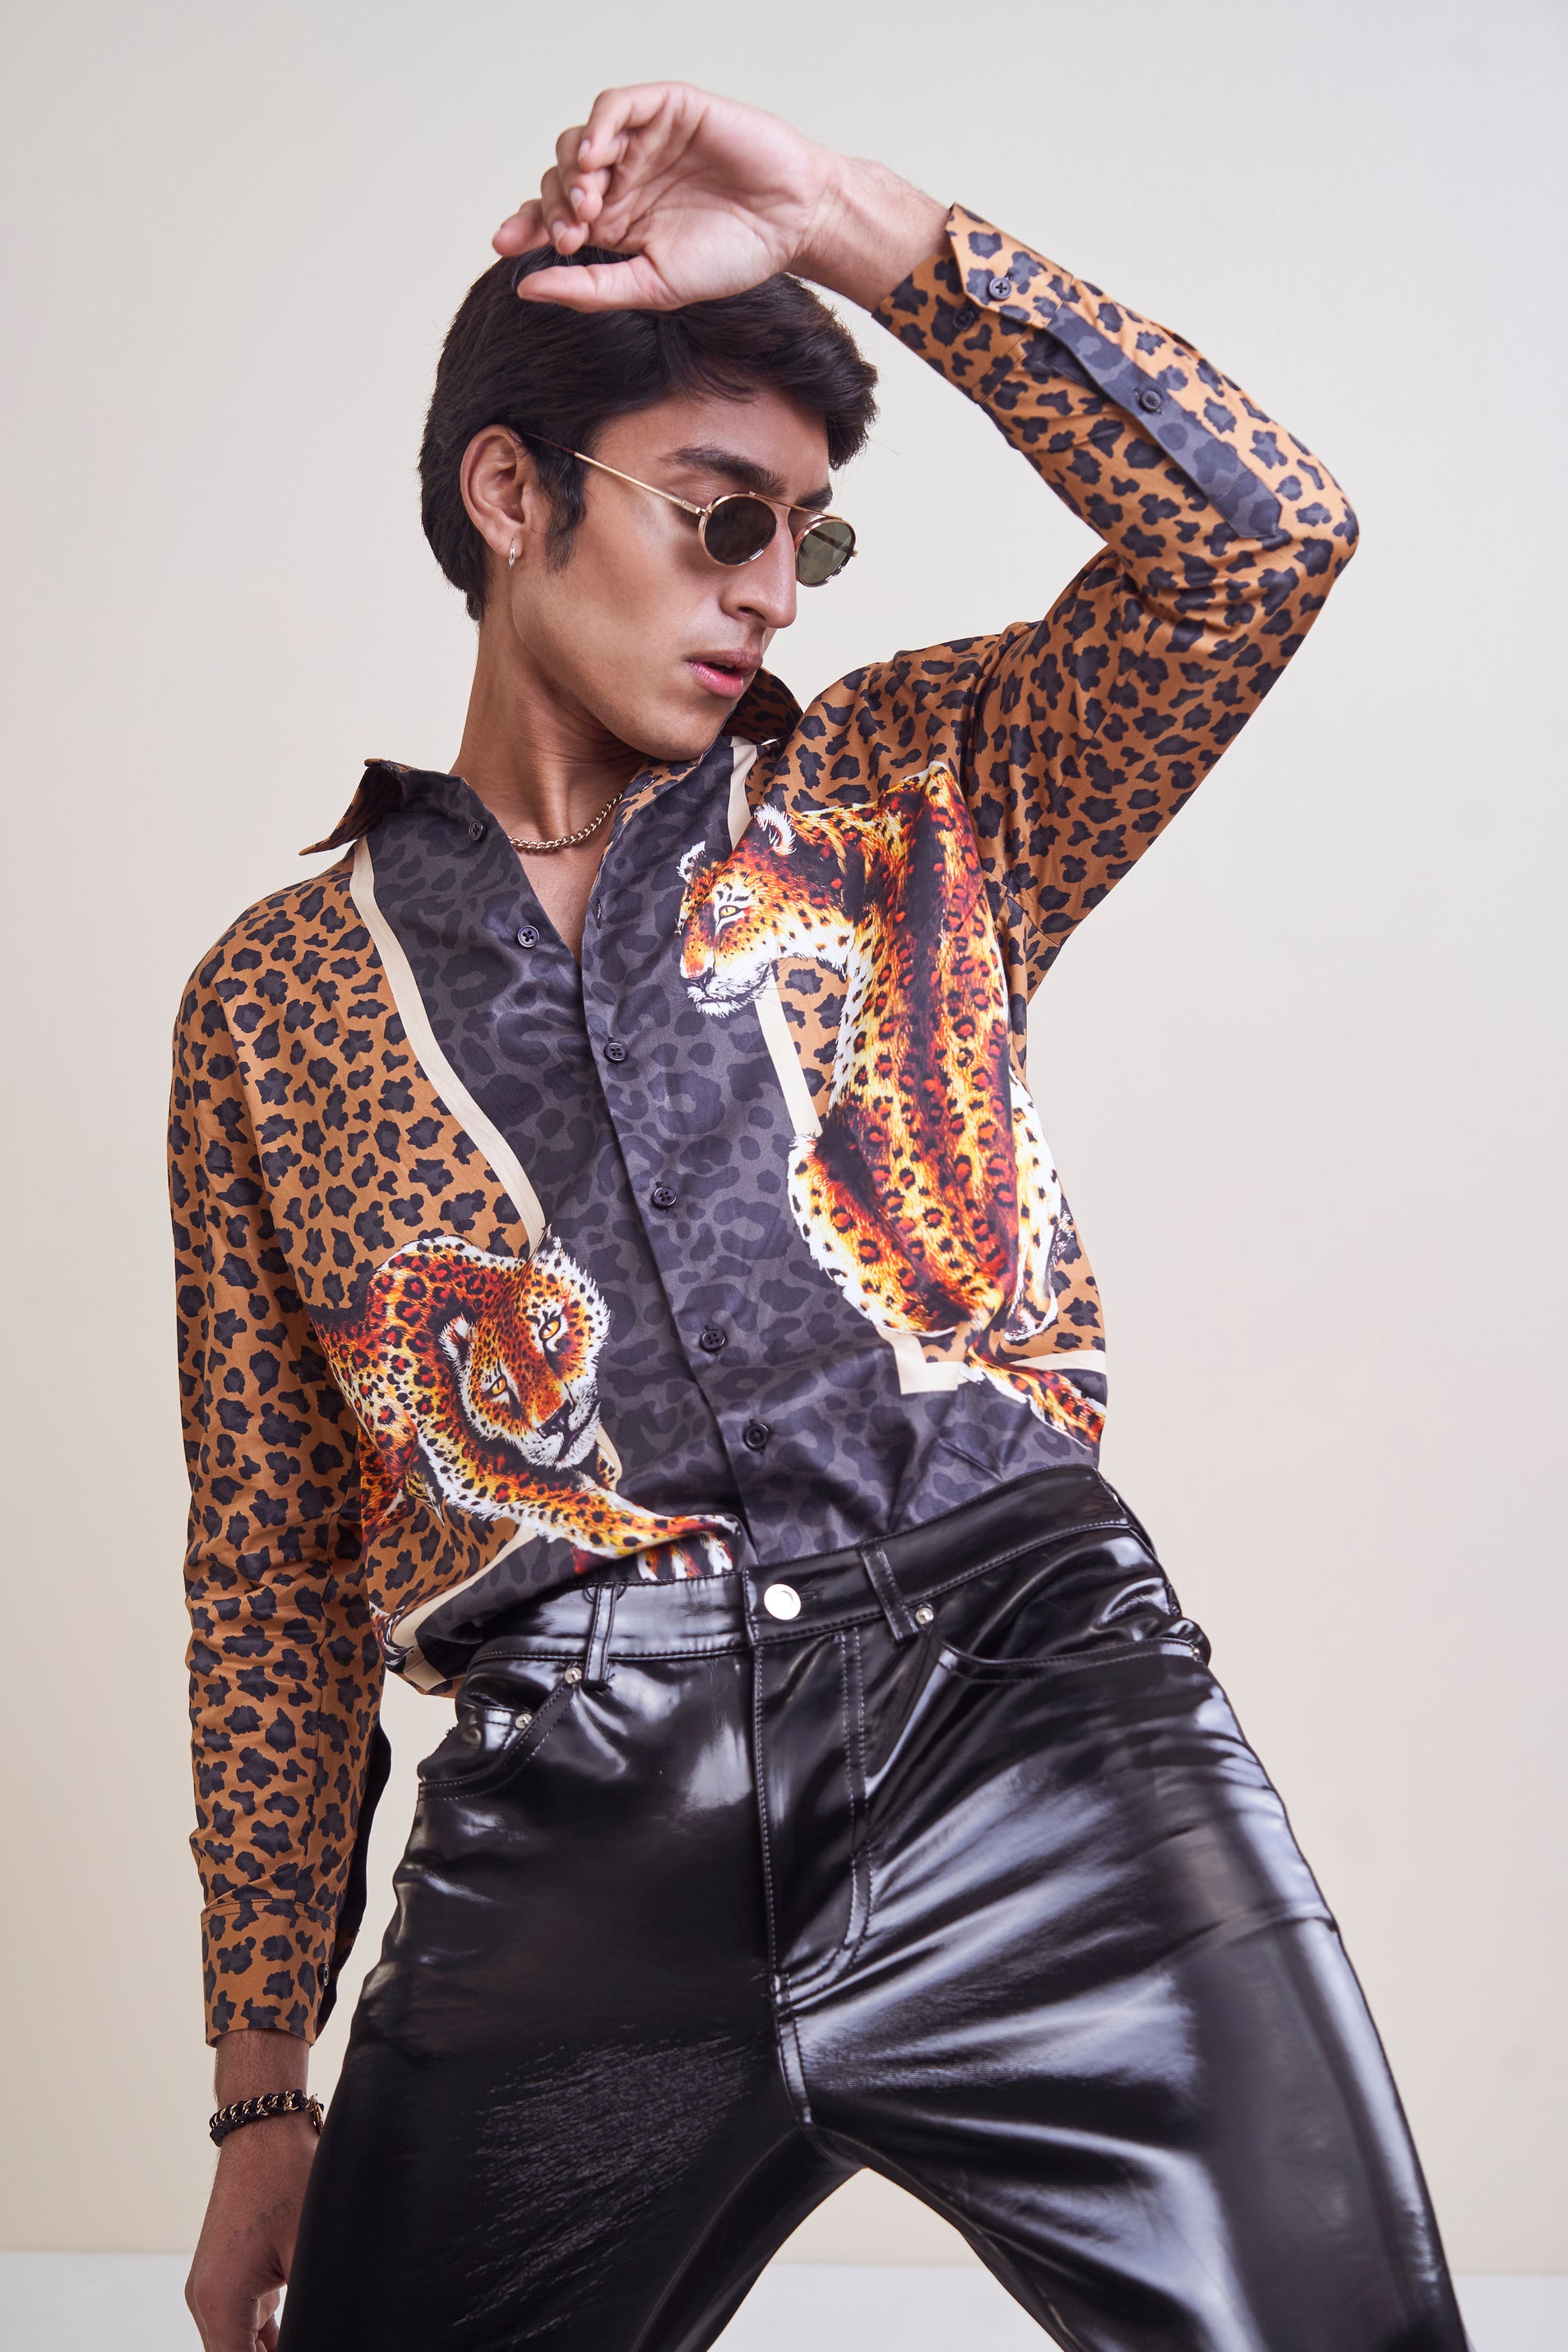 A luxurious leopard print shirt, featuring intricate detailing and high-end materials for a sophisticated and stylish look